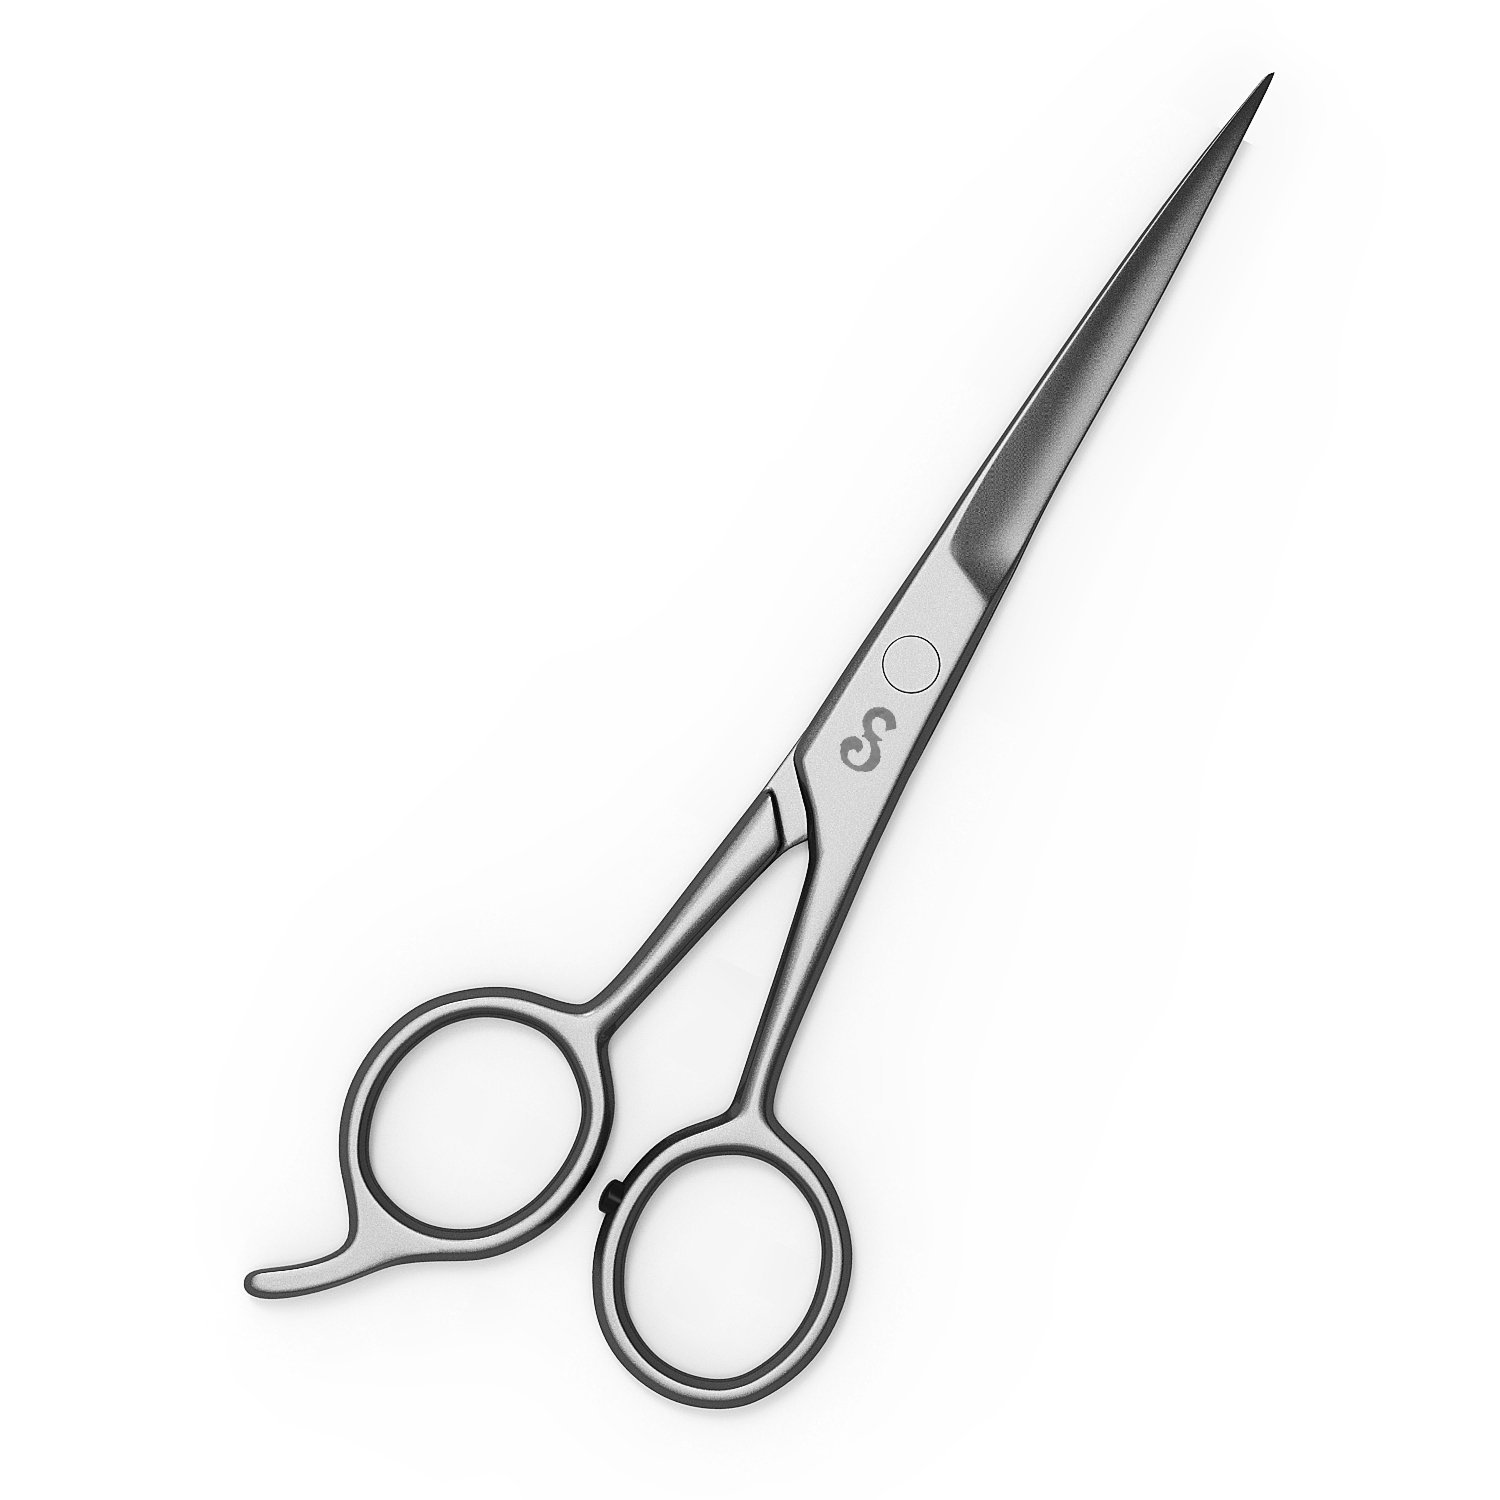 Amazon.com : Sterling Beauty Tools 6.5 Inch Hair Cutting Scissors ...